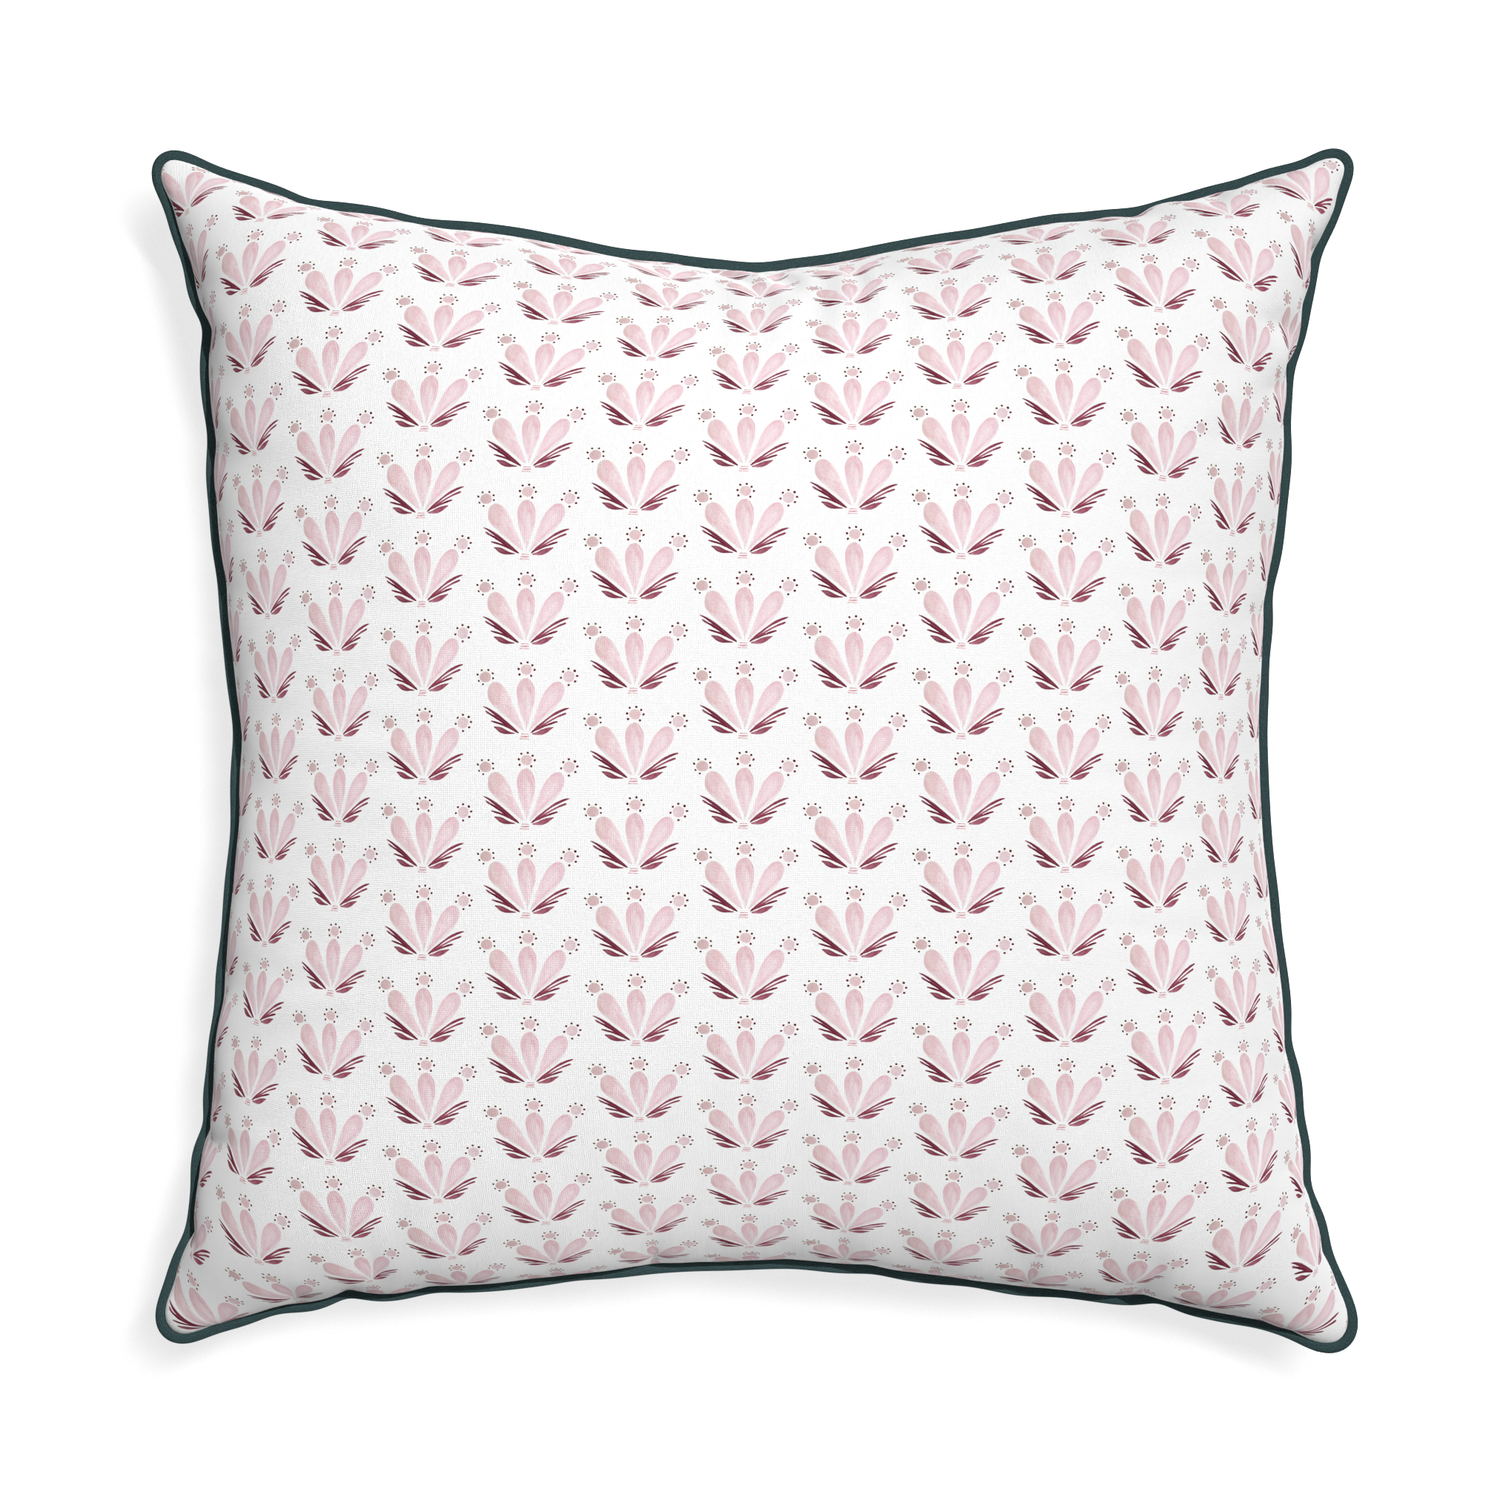 Euro-sham serena pink custom pink & burgundy drop repeat floralpillow with p piping on white background